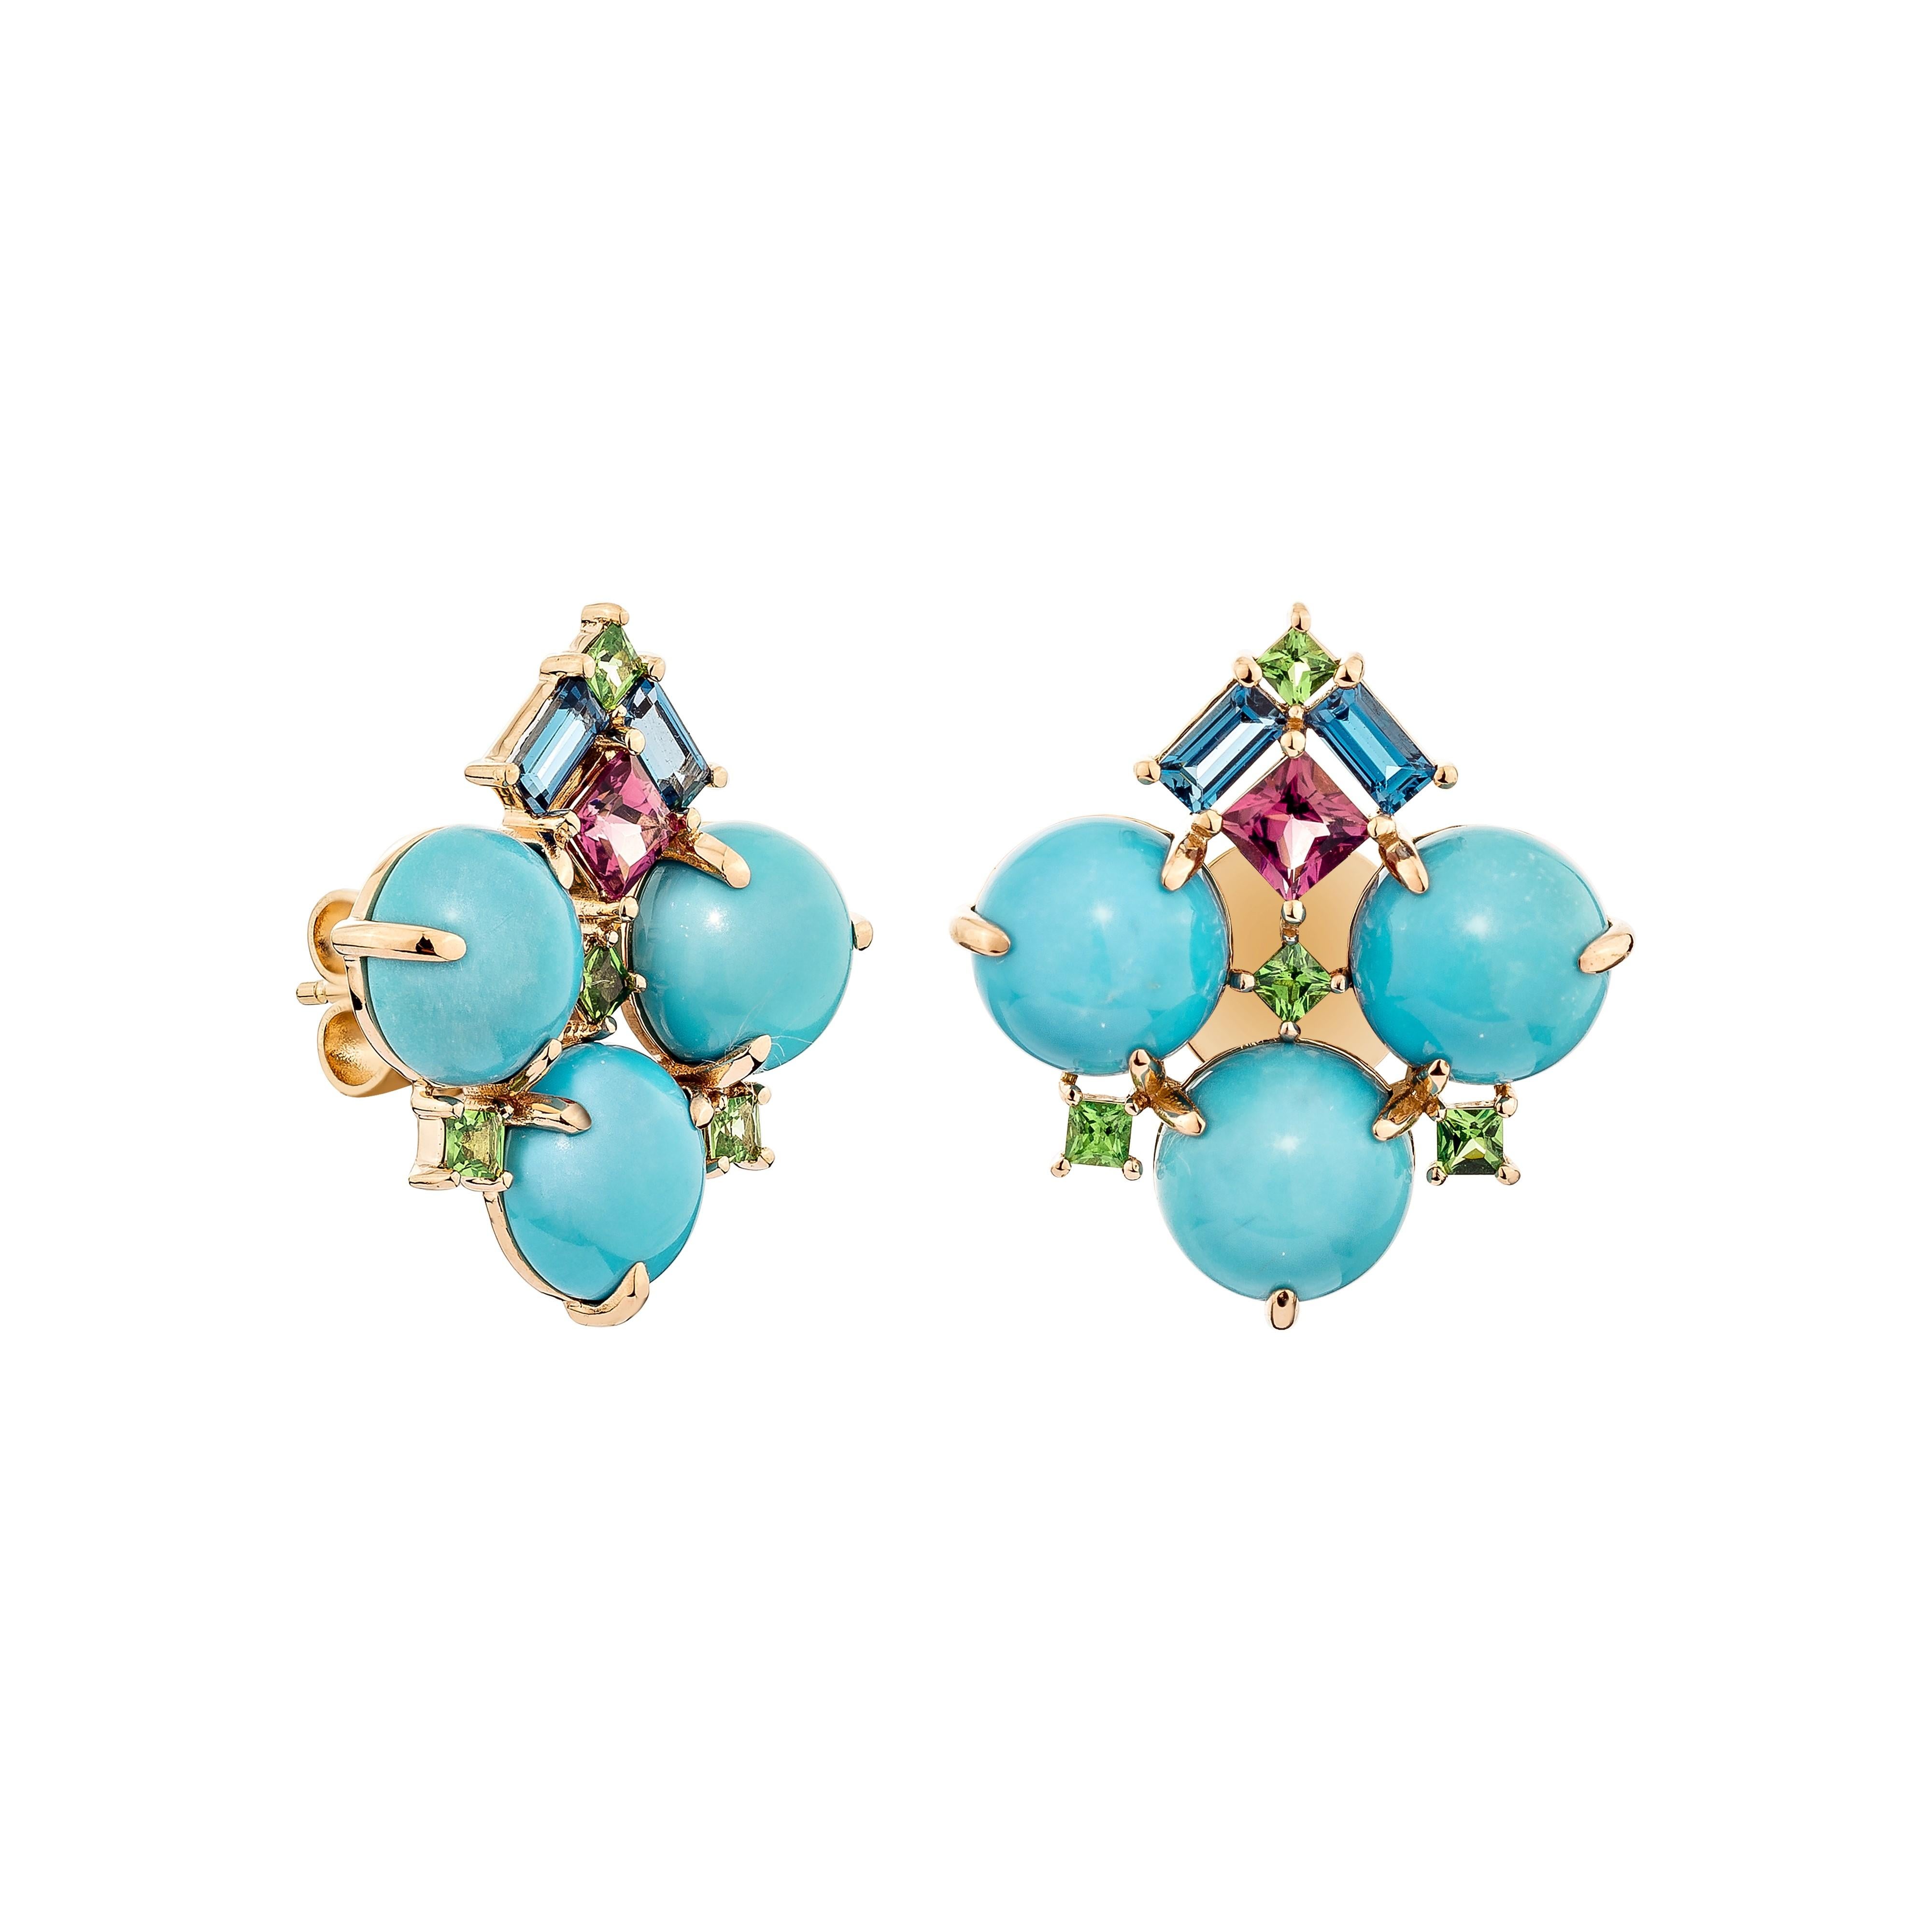 Round Cut 11.65 Carat Turquoise Stud Earring in 18Karat Rose Gold with Multi gemstone. For Sale